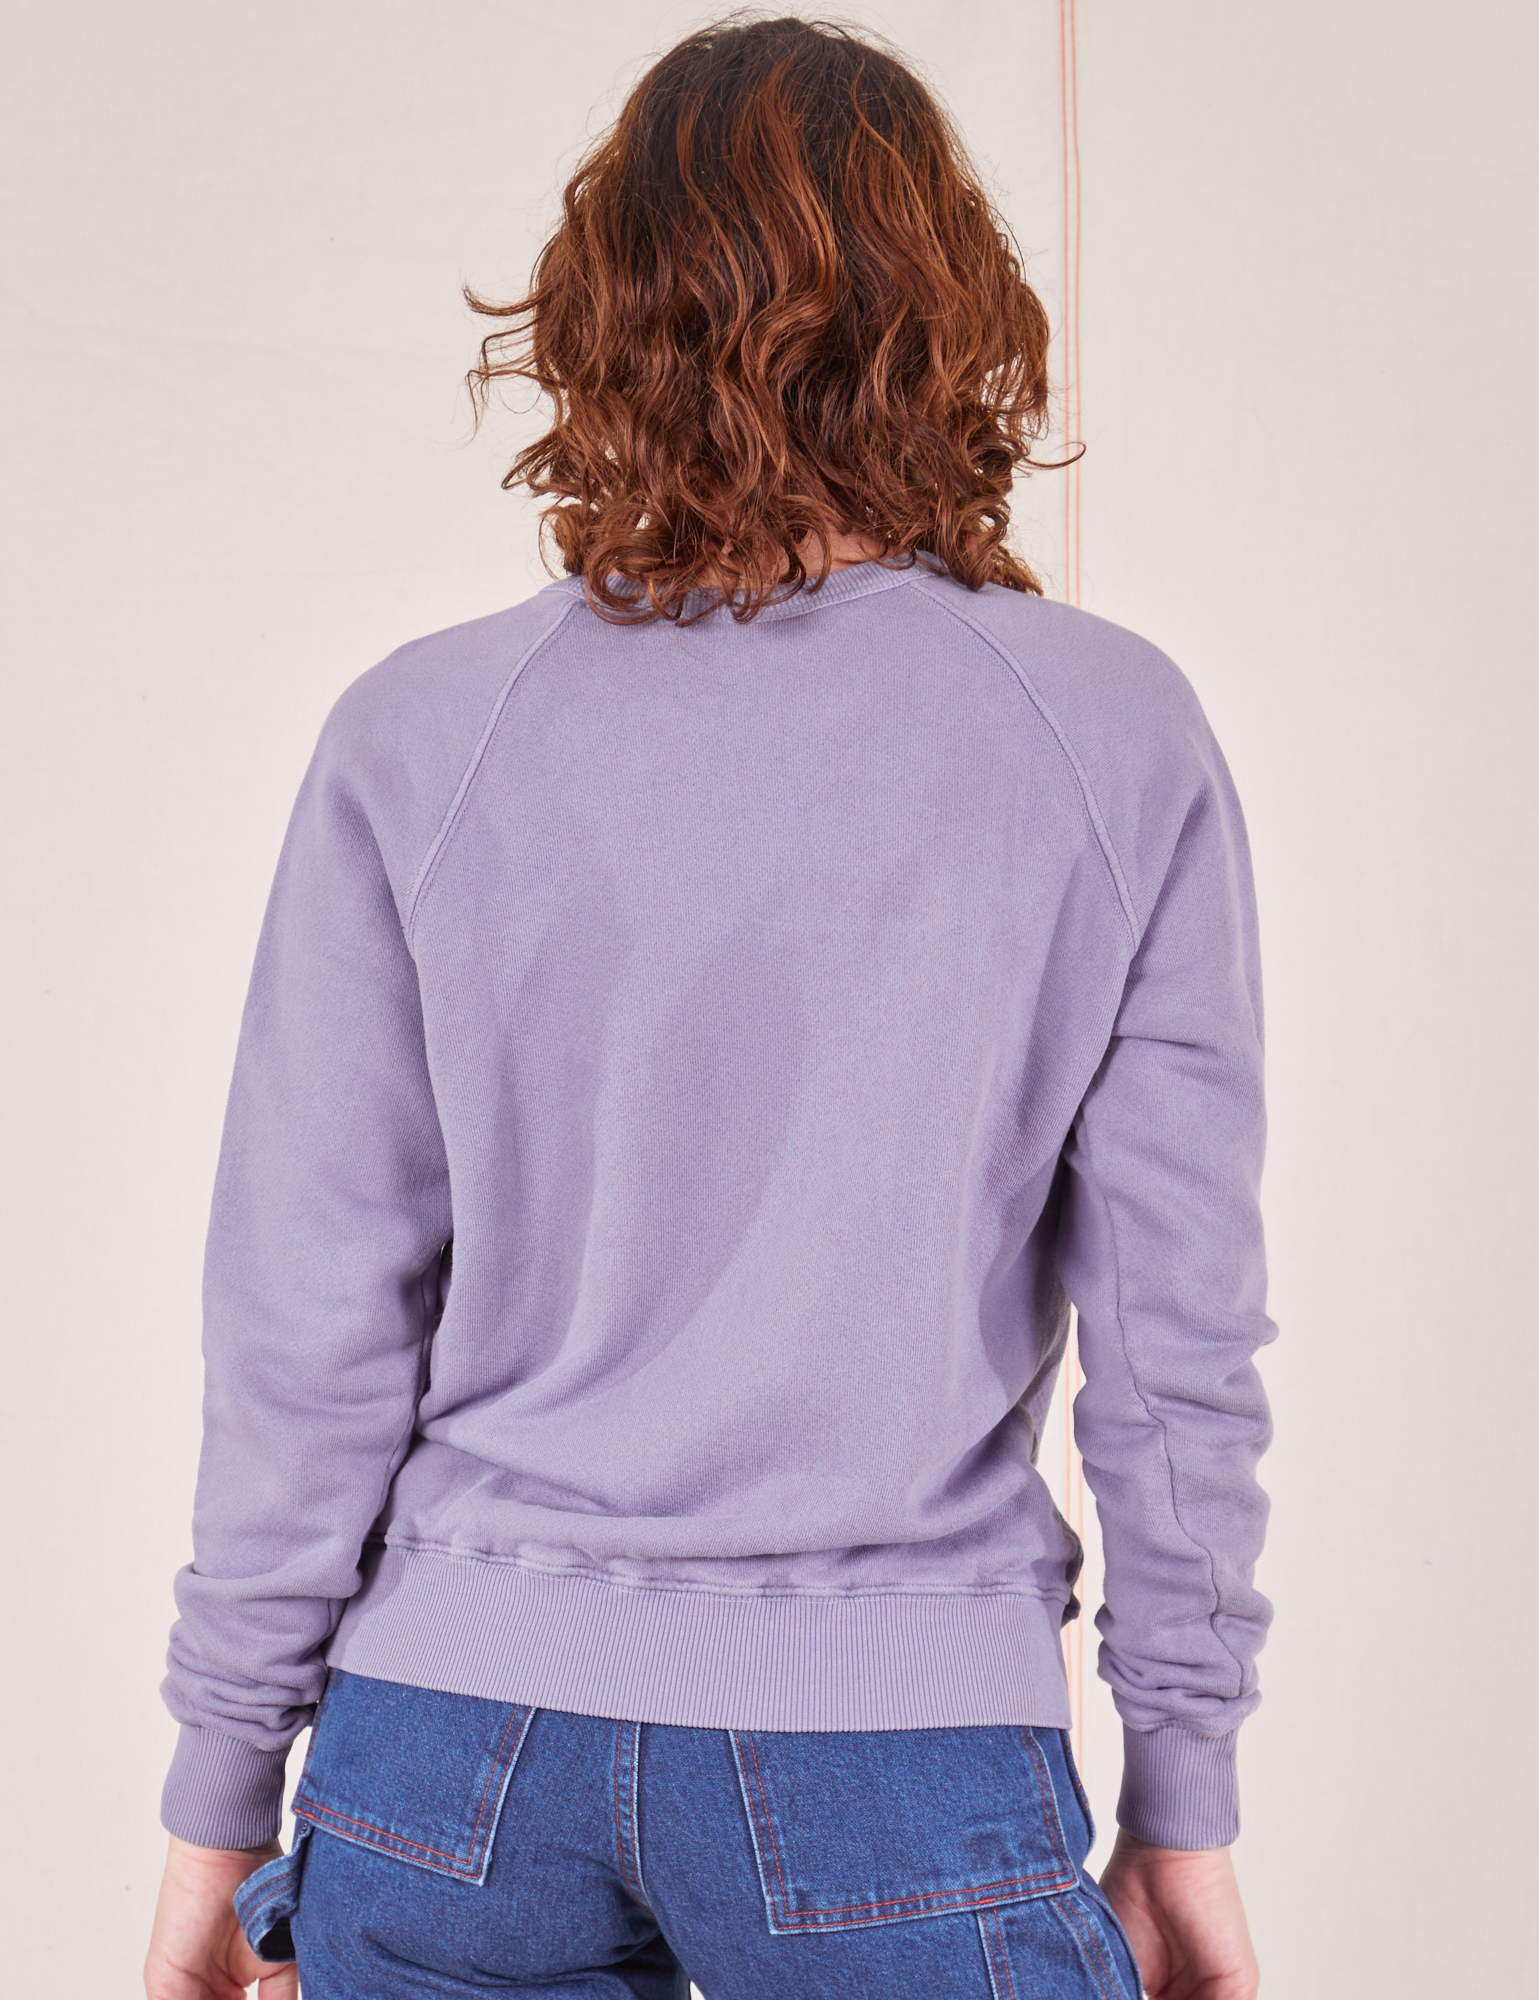 Bill Ogden&#39;s Sun Baby Crew in Faded Grape back view on Alex